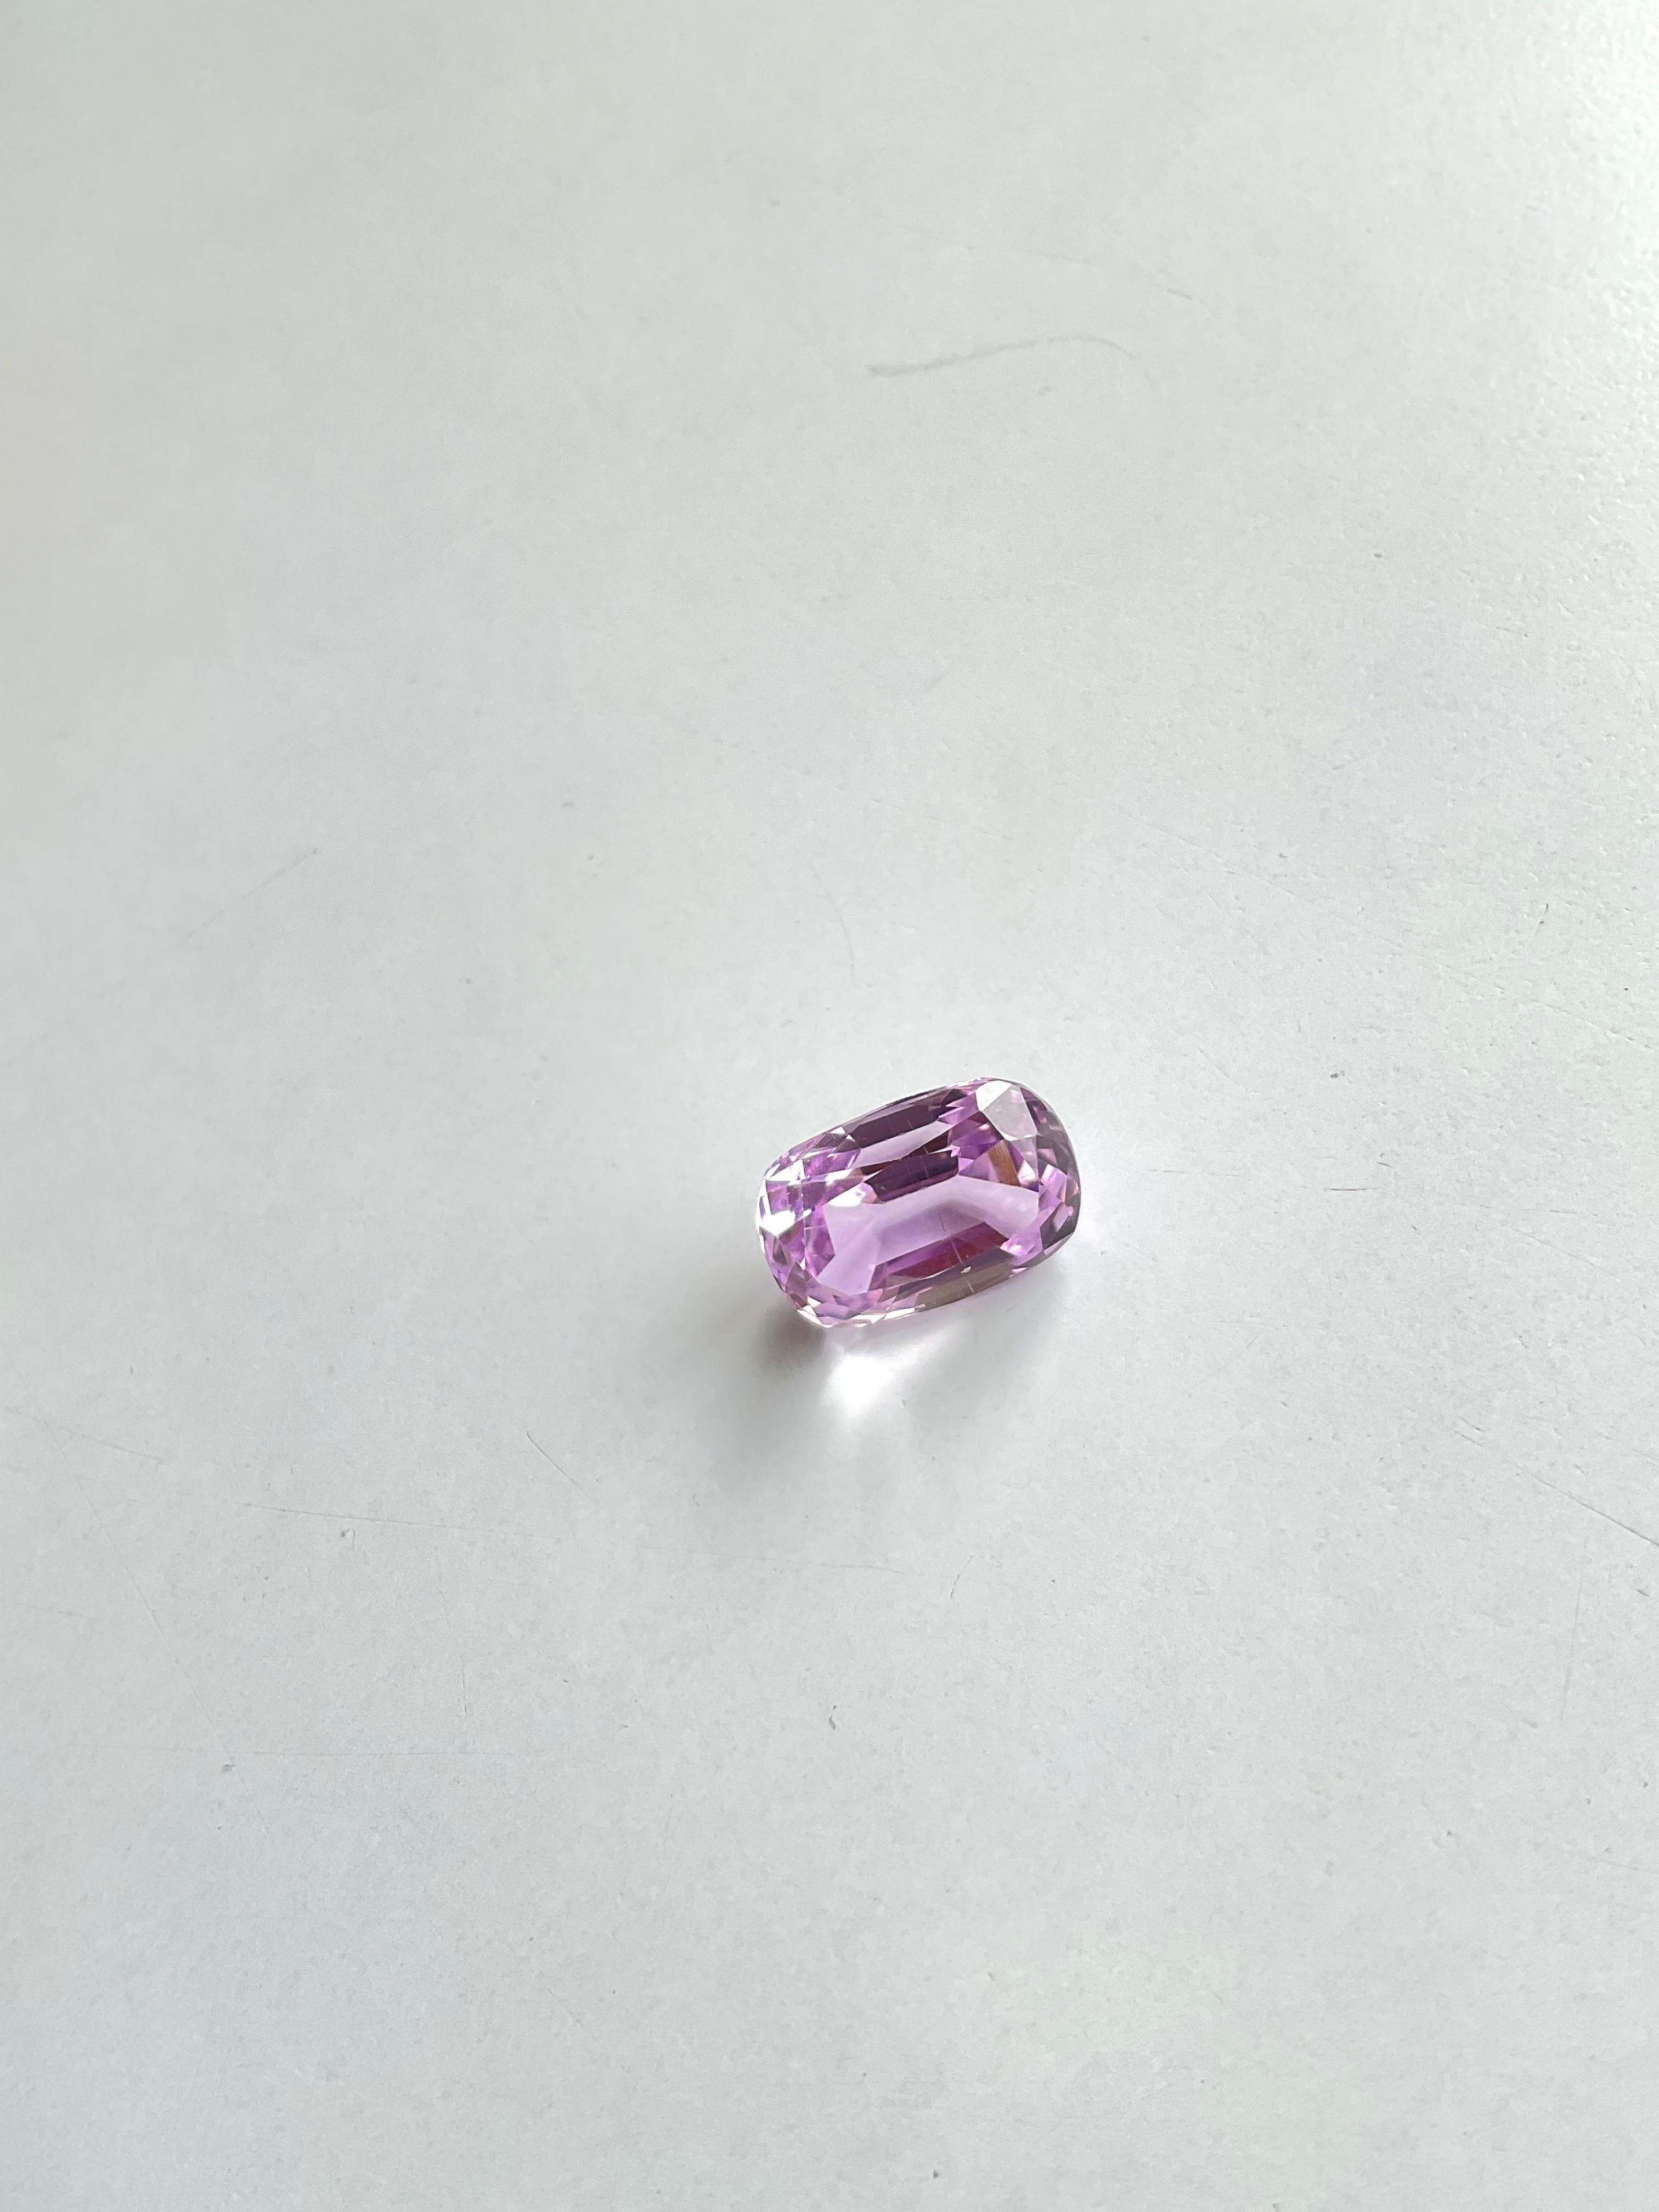 Women's or Men's 7.77 Carats Pink Kunzite Oval Natural Cut Stone For Fine Gem Jewellery For Sale